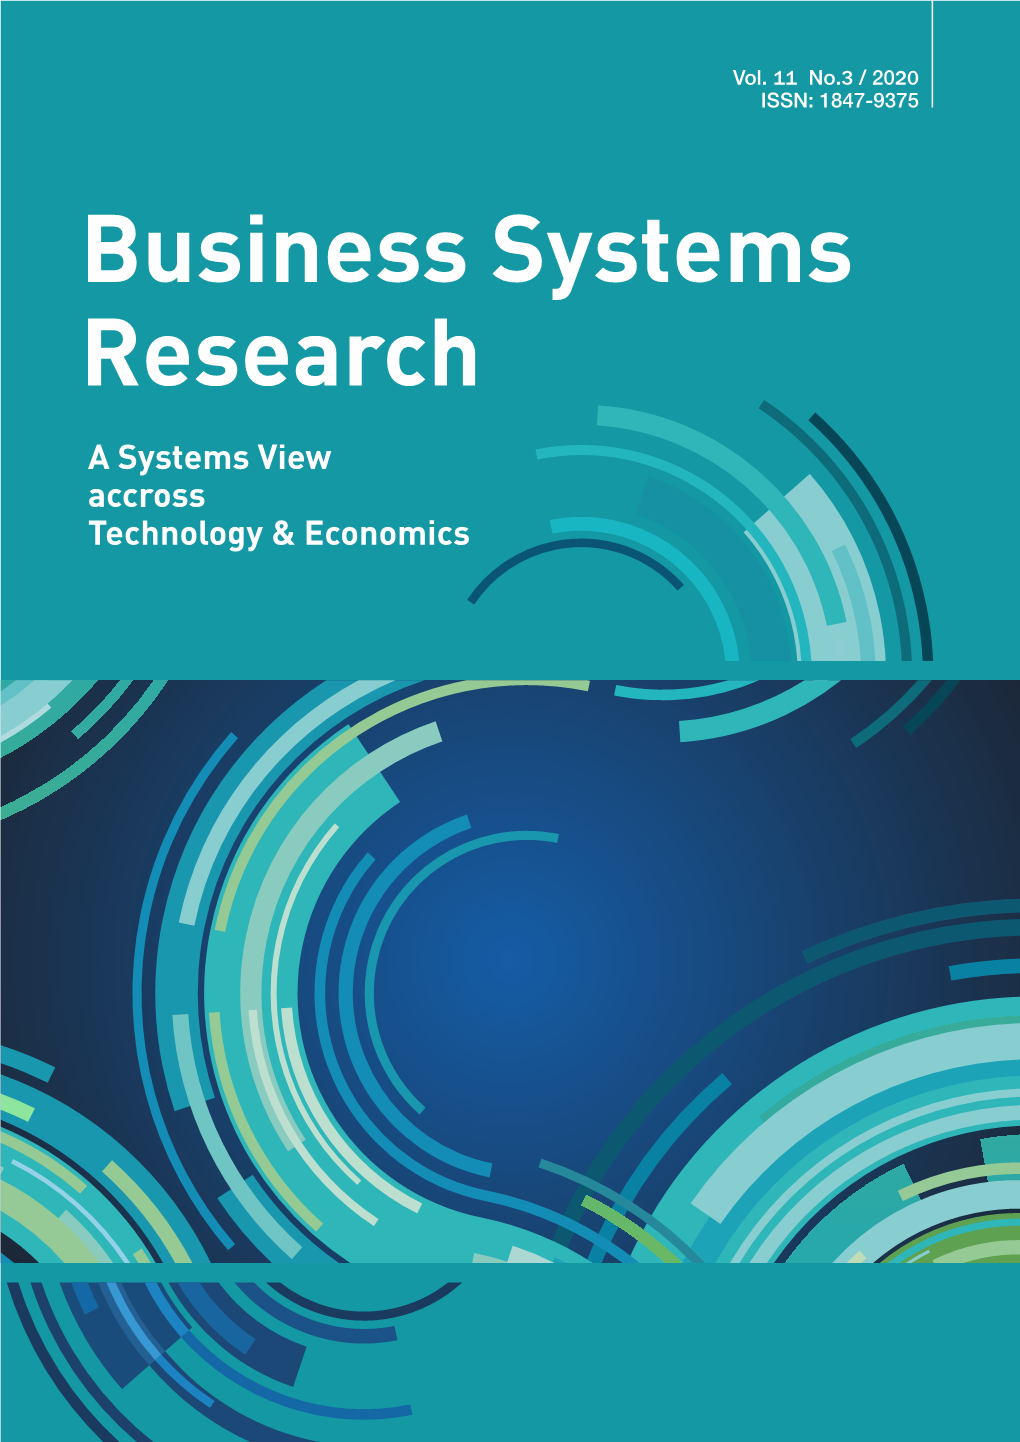 Vol. 11 No.3 / 2020 ISSN: 1847-9375 Business Systems Research | Vol